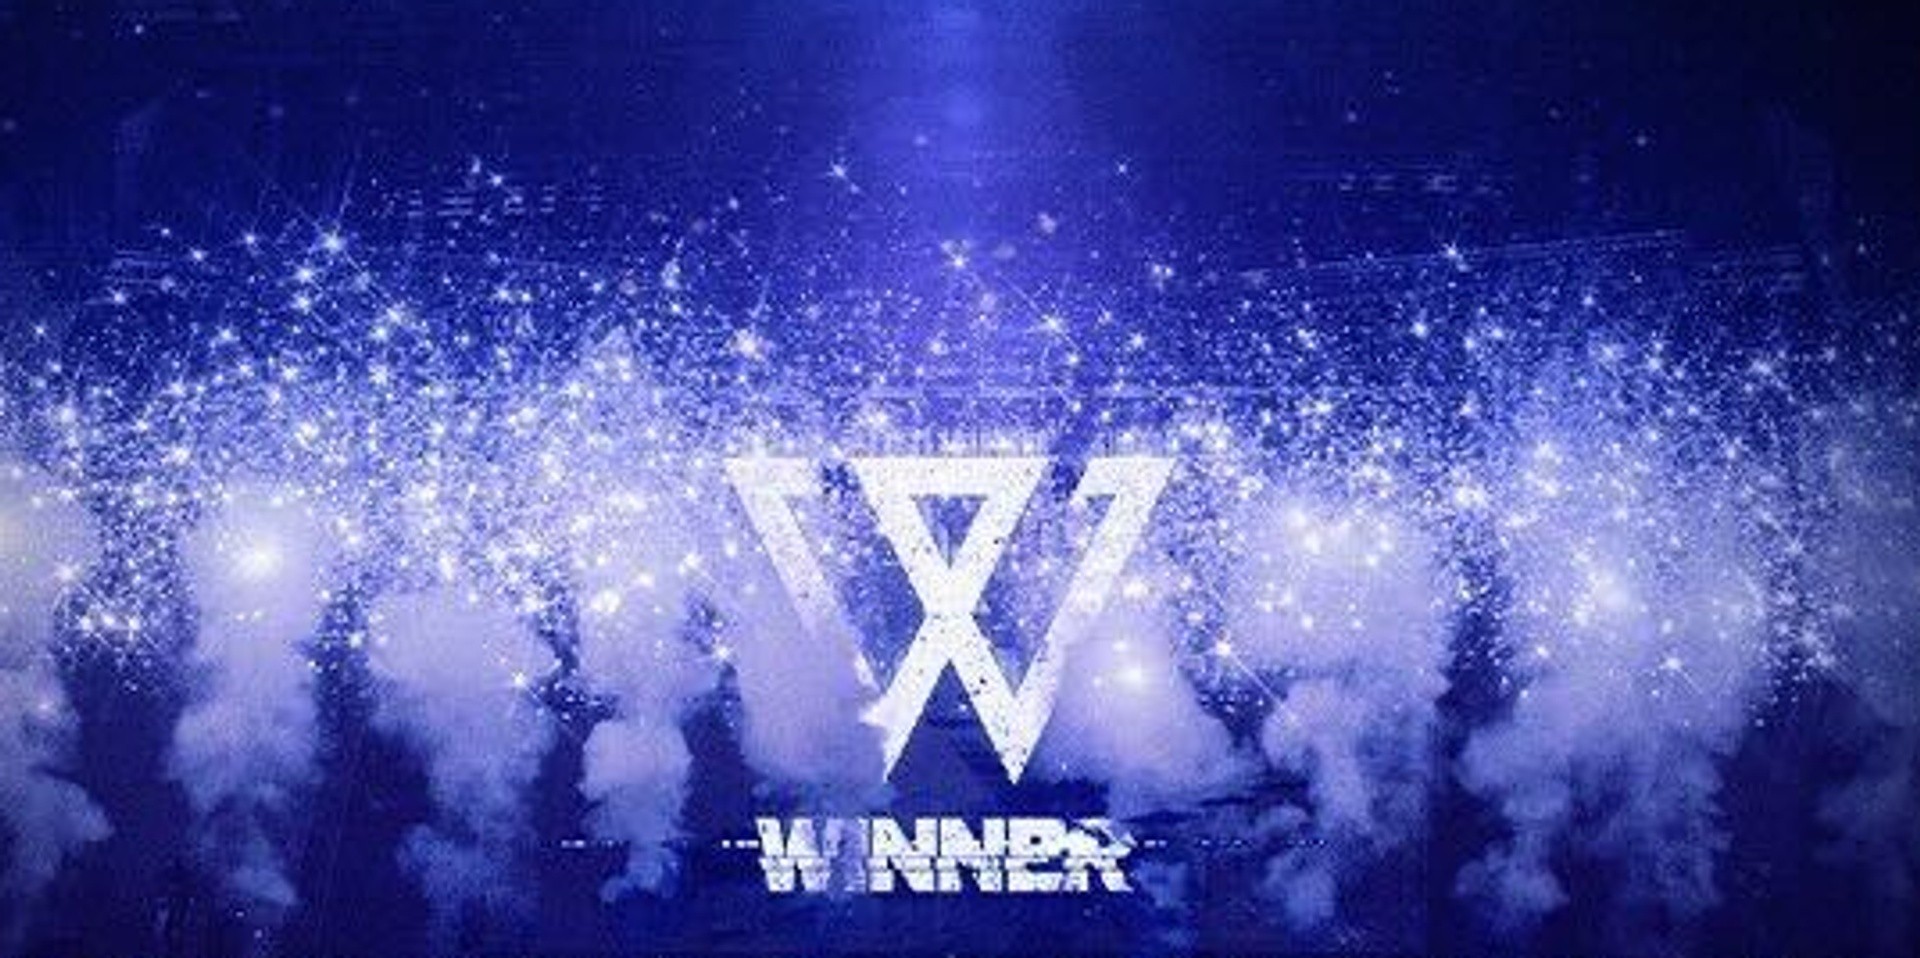 WINNER to hold their first in-person concert in two years, 'WINNER 2022 CONCERT', this May